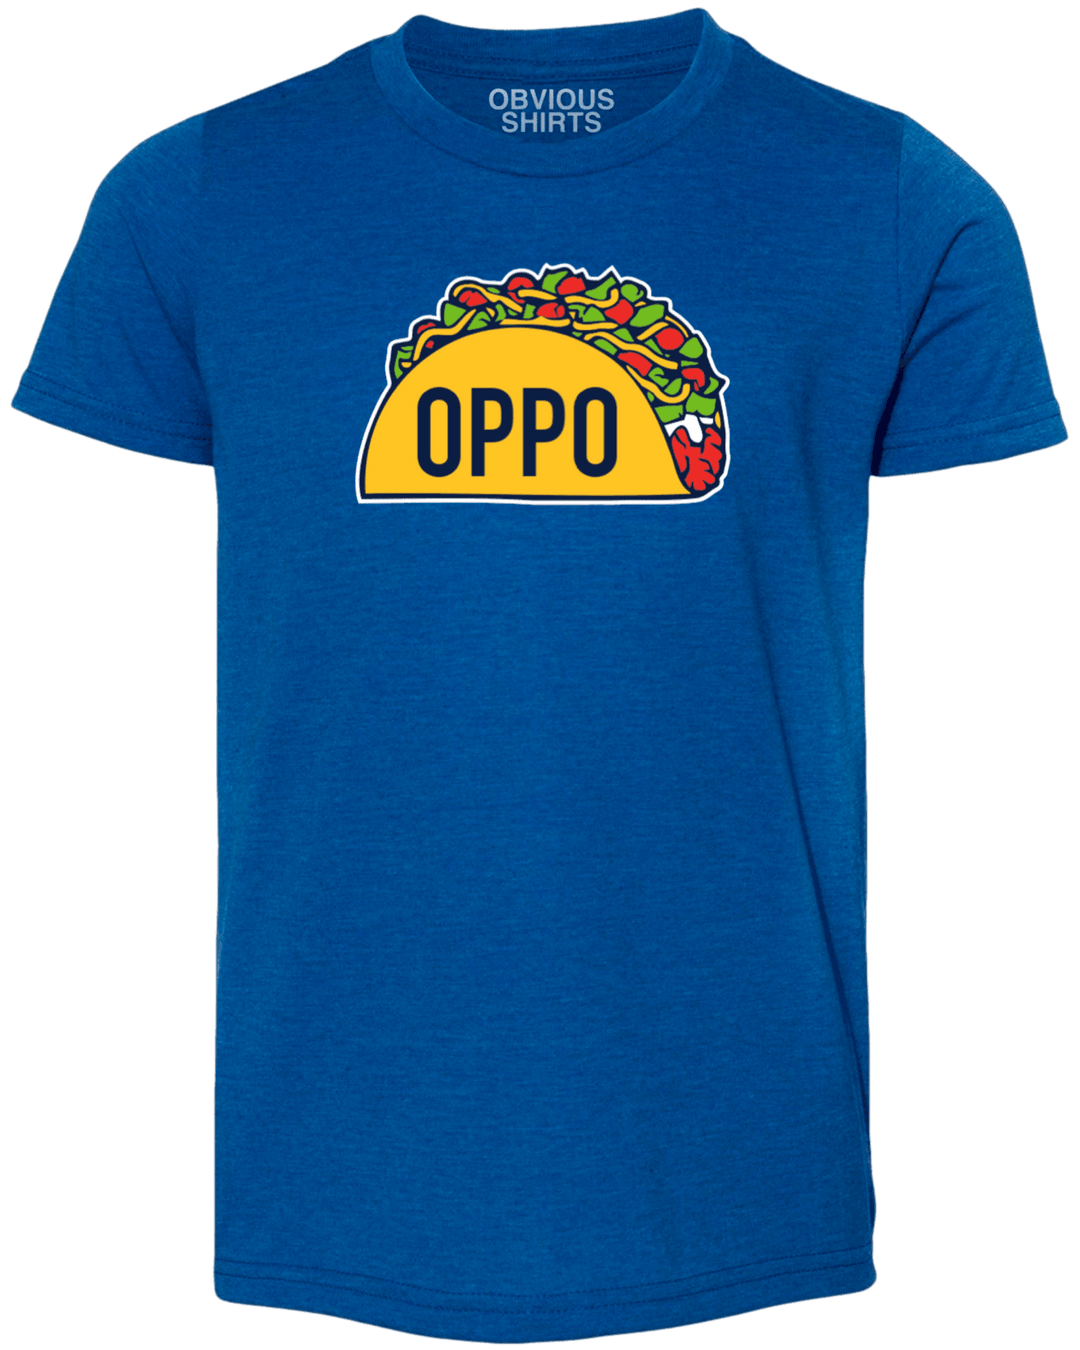 OPPO TACO. (YOUTH) - OBVIOUS SHIRTS.